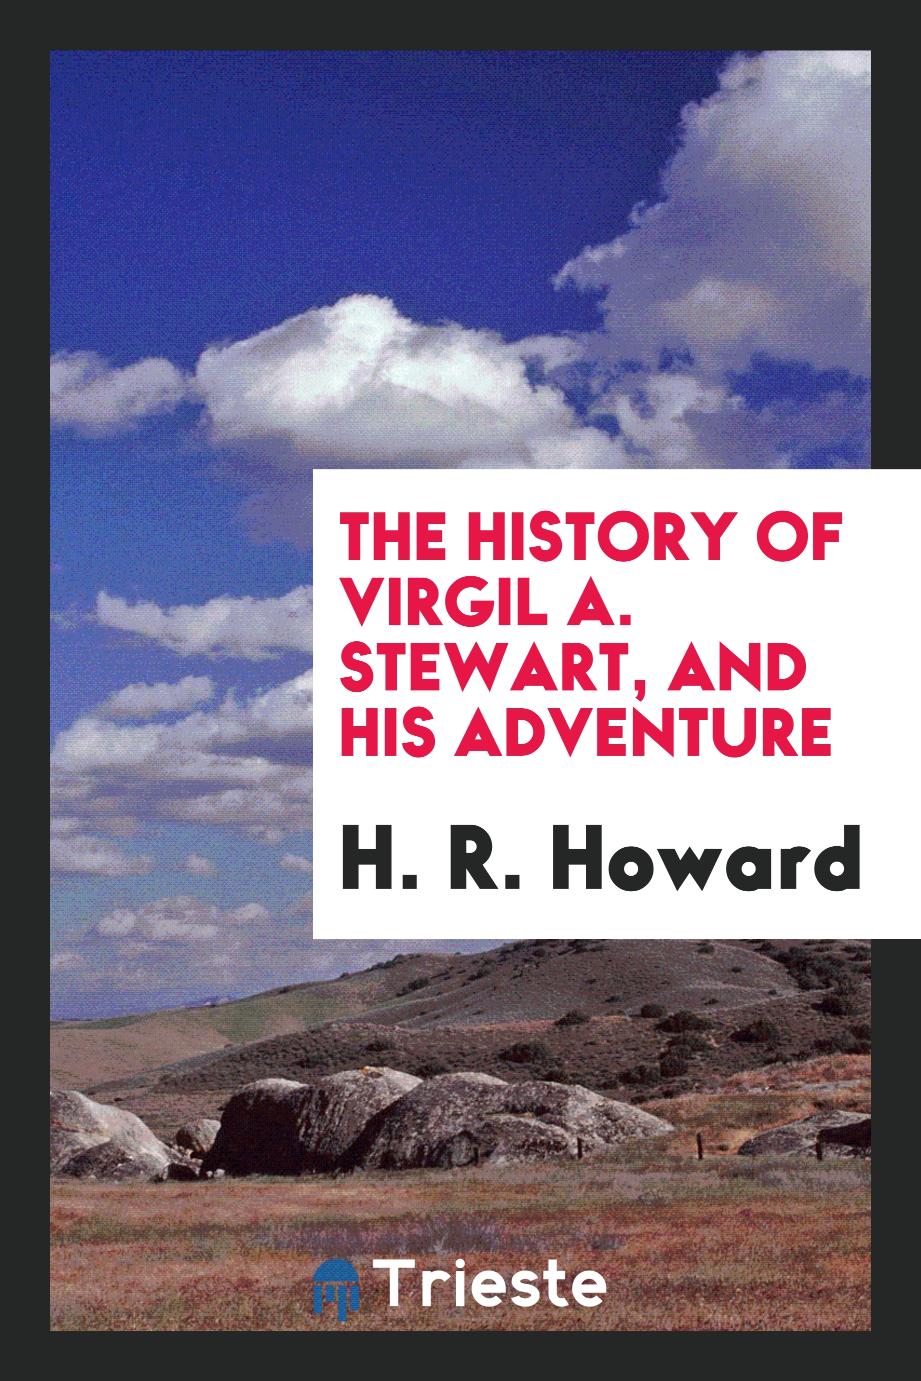 The History of Virgil A. Stewart, and His Adventure